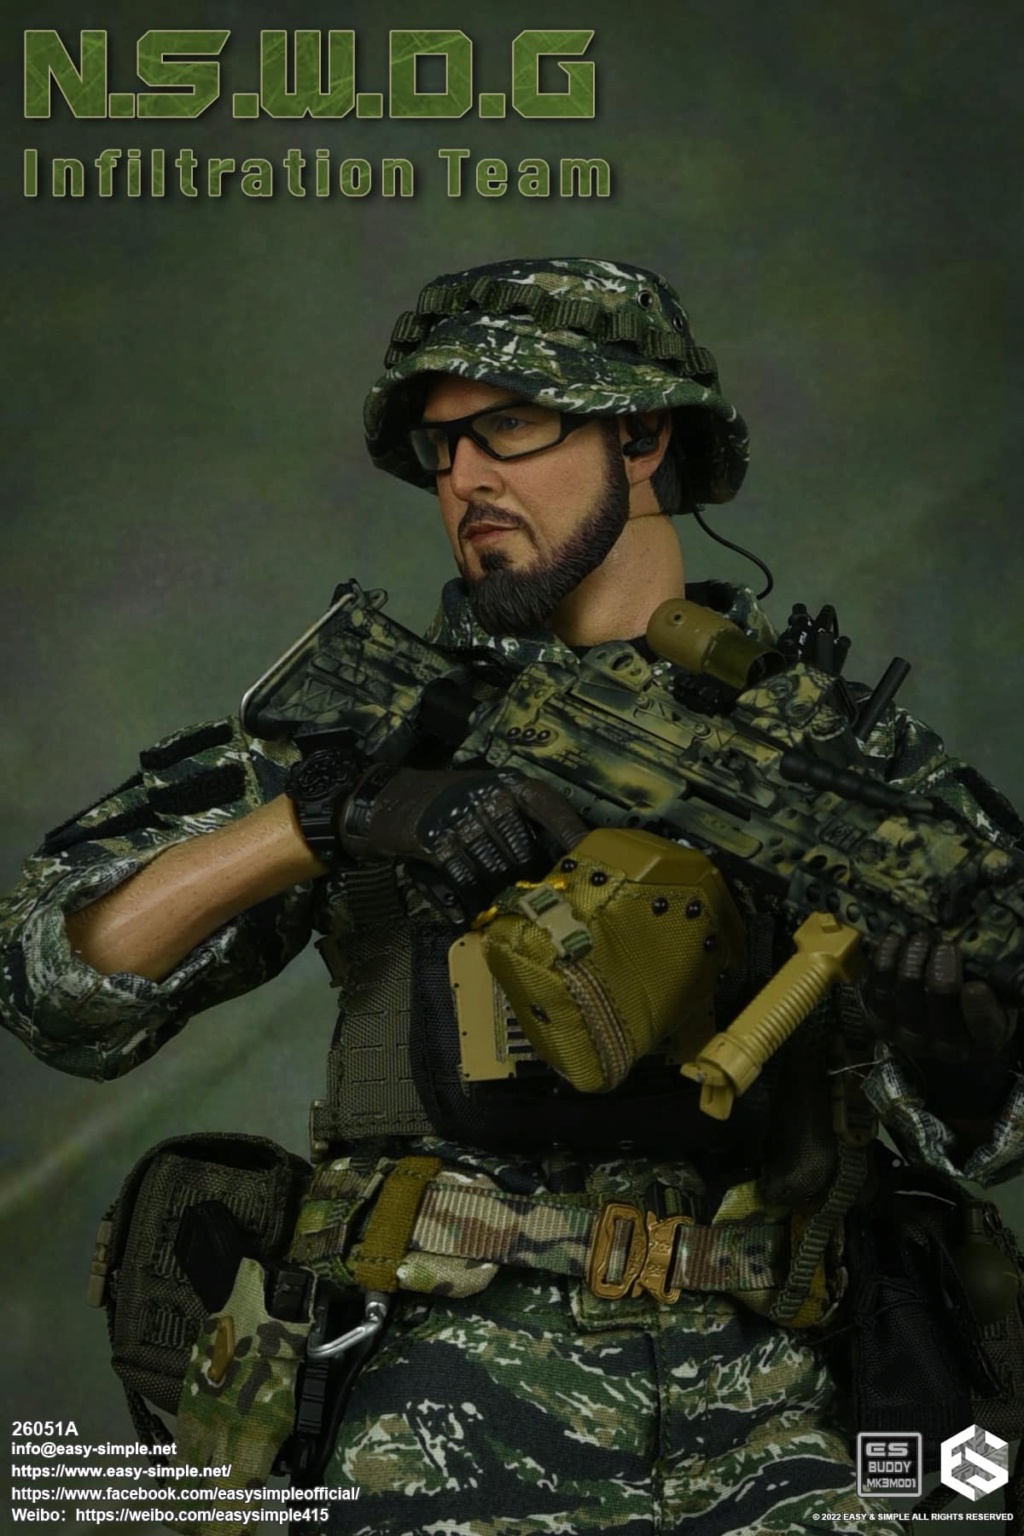 easy - NEW PRODUCT: EASY AND SIMPLE 1/6 SCALE FIGURE: N.S.W.D.G INFILTRATION TEAM - (2 Versions) 11854